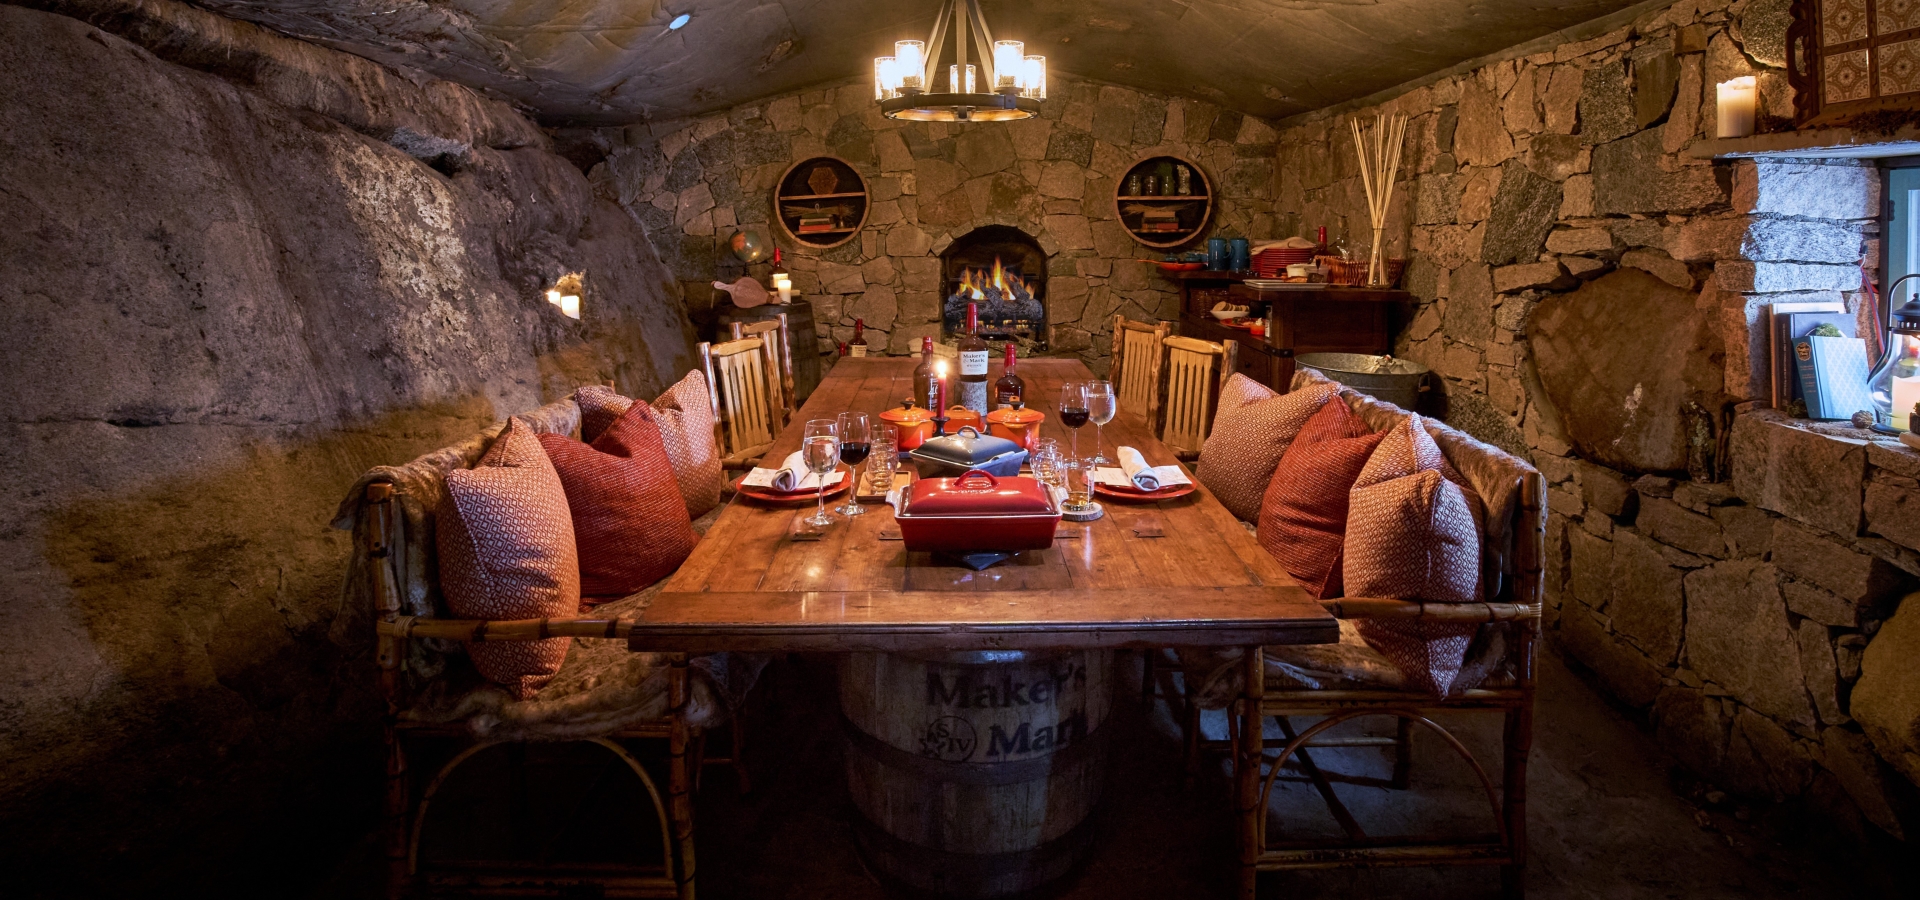 Discover The Preserve RI's Hobbit House dining – a fairytale experience.